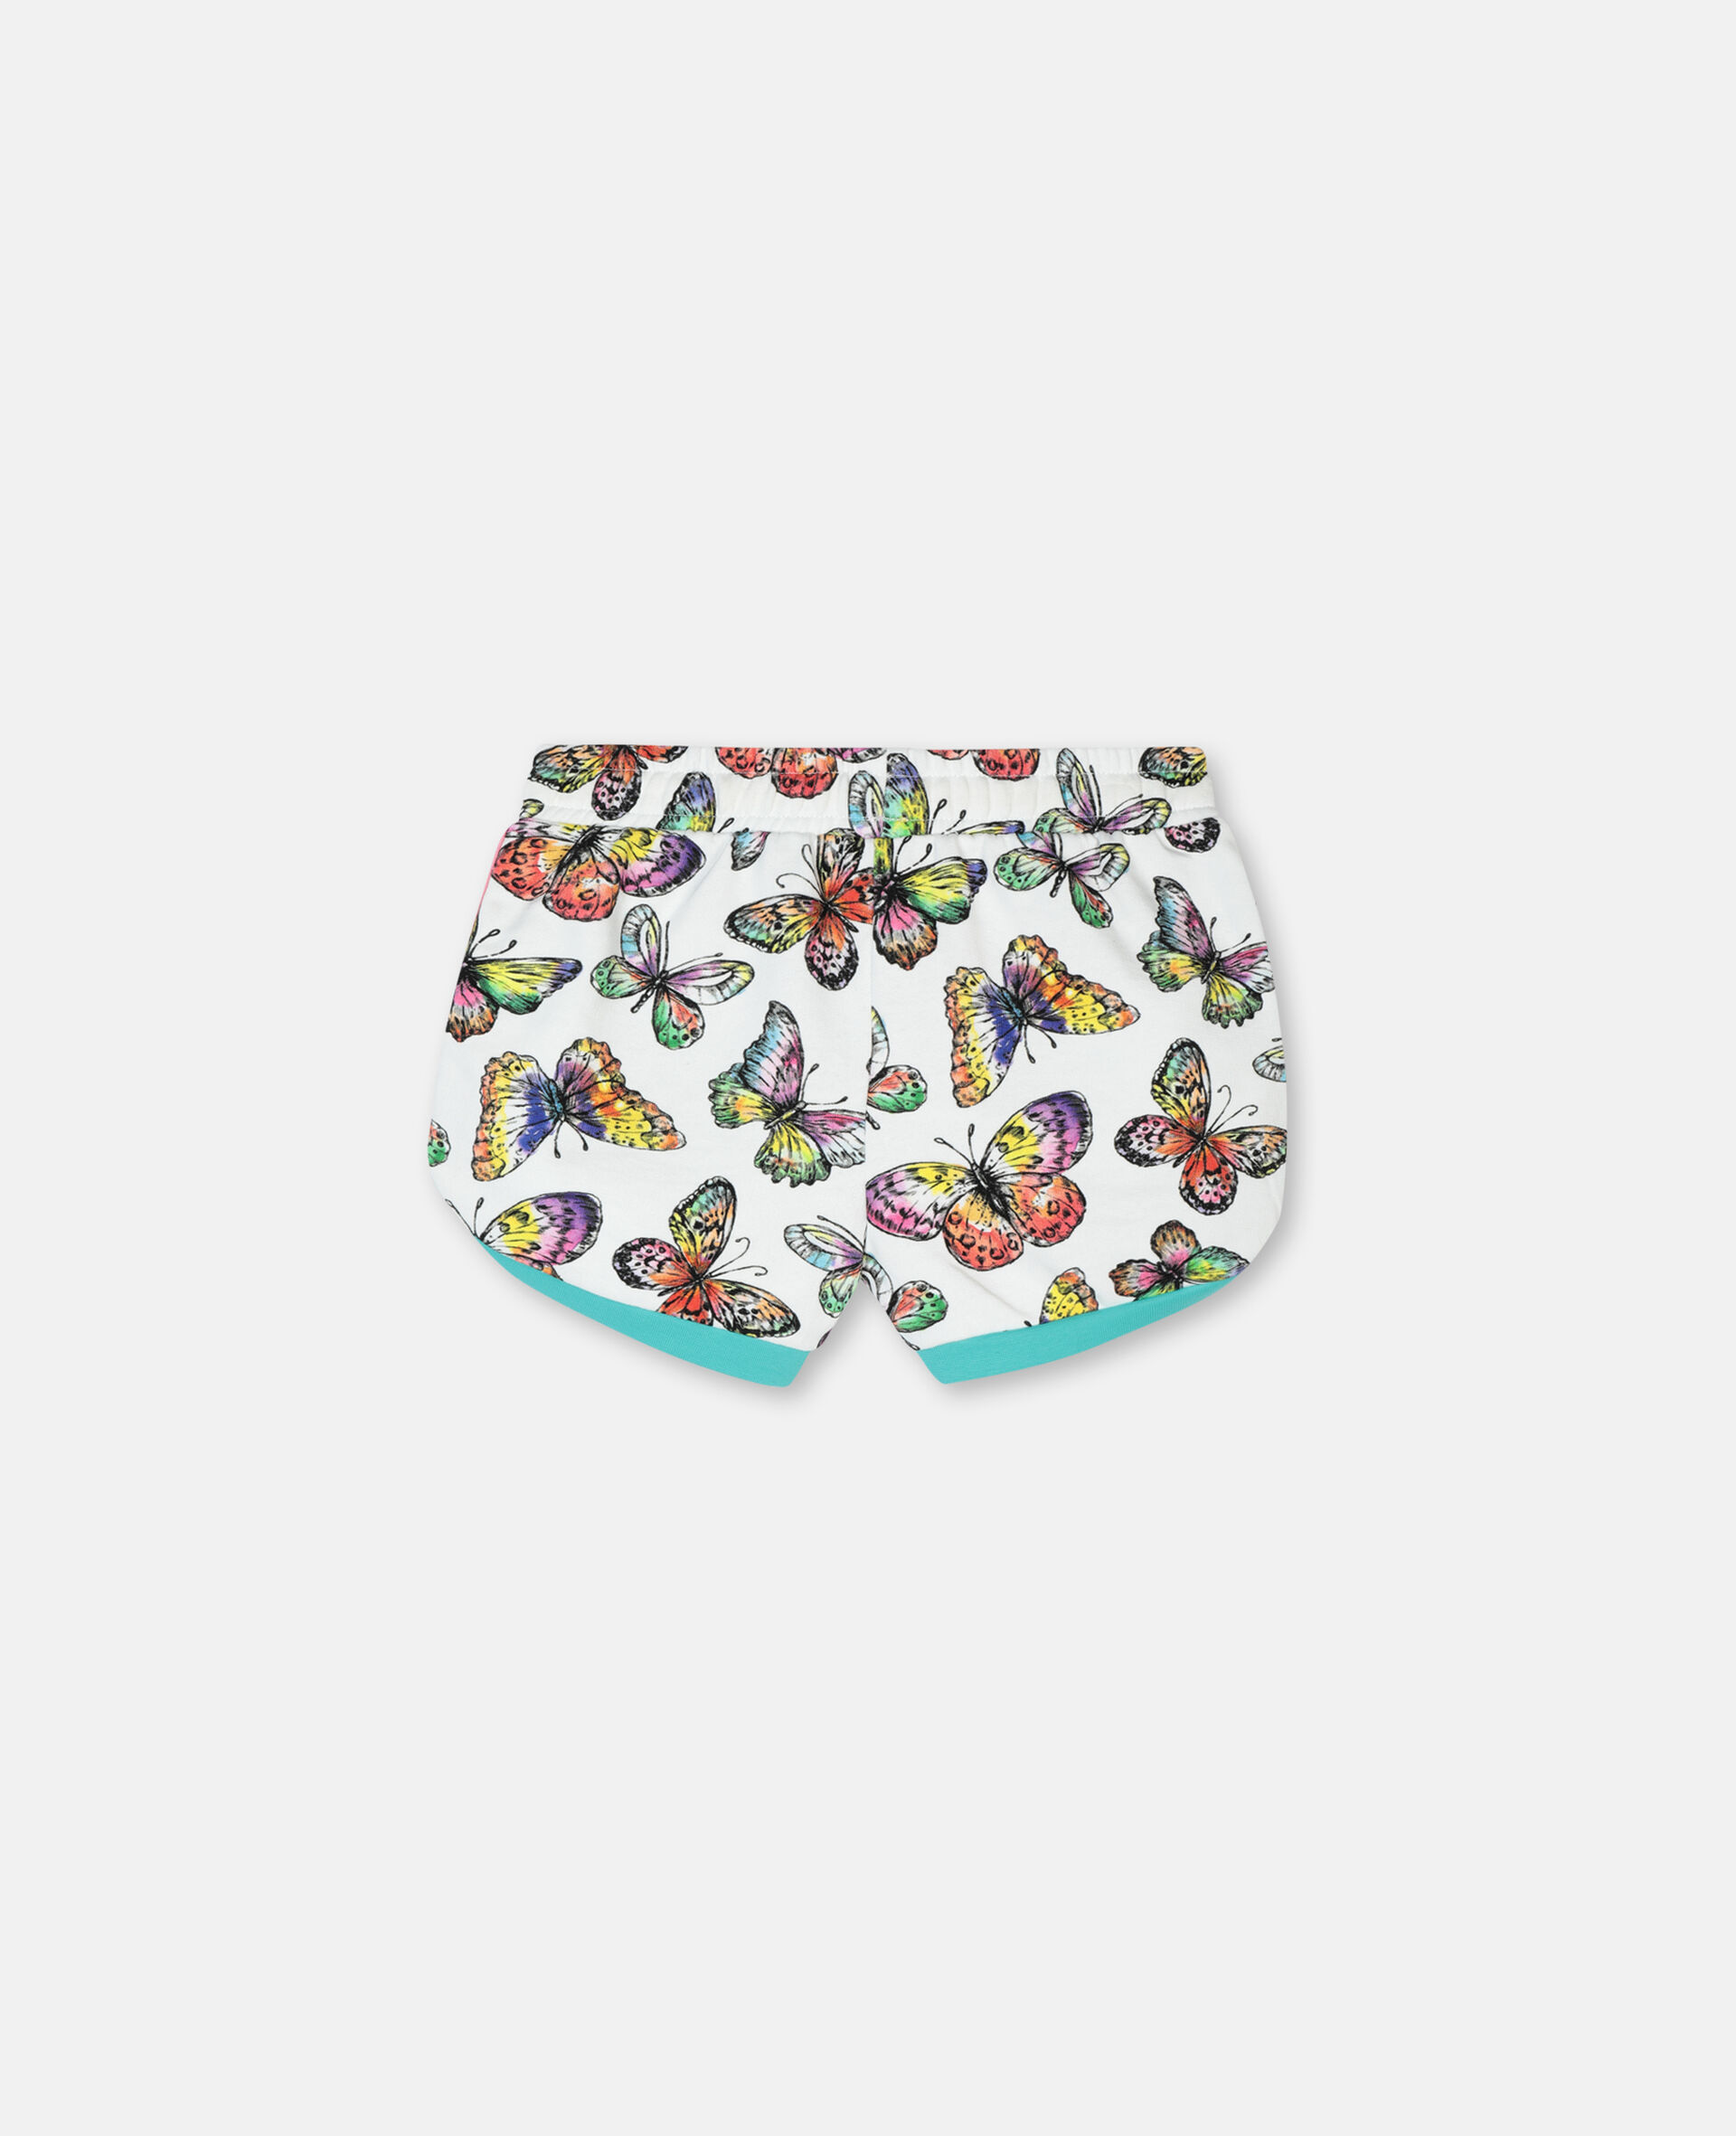 Butterfly Cotton Fleece Shorts-Multicolour-large image number 3